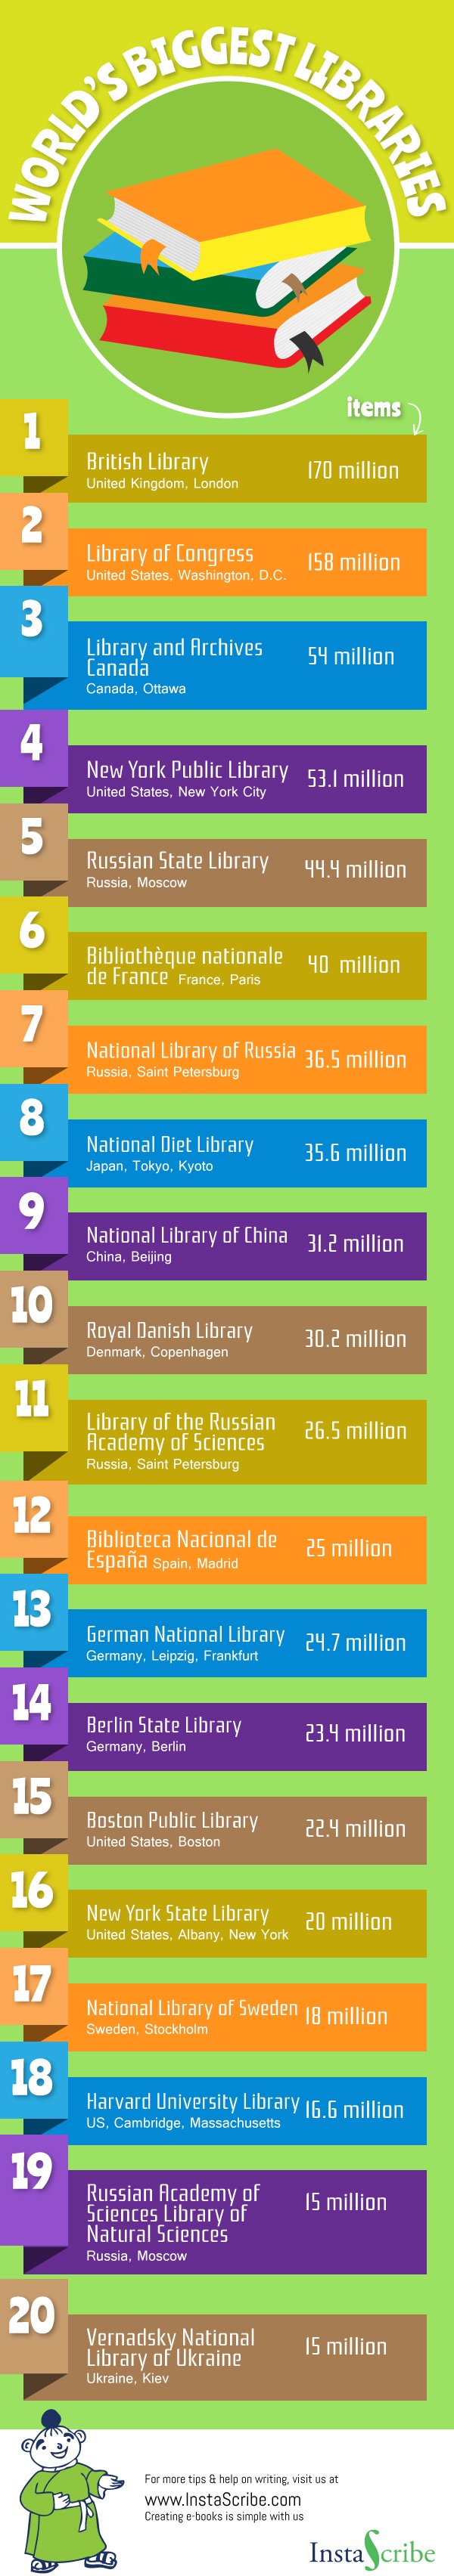 The biggest #libraries in the world #infographic